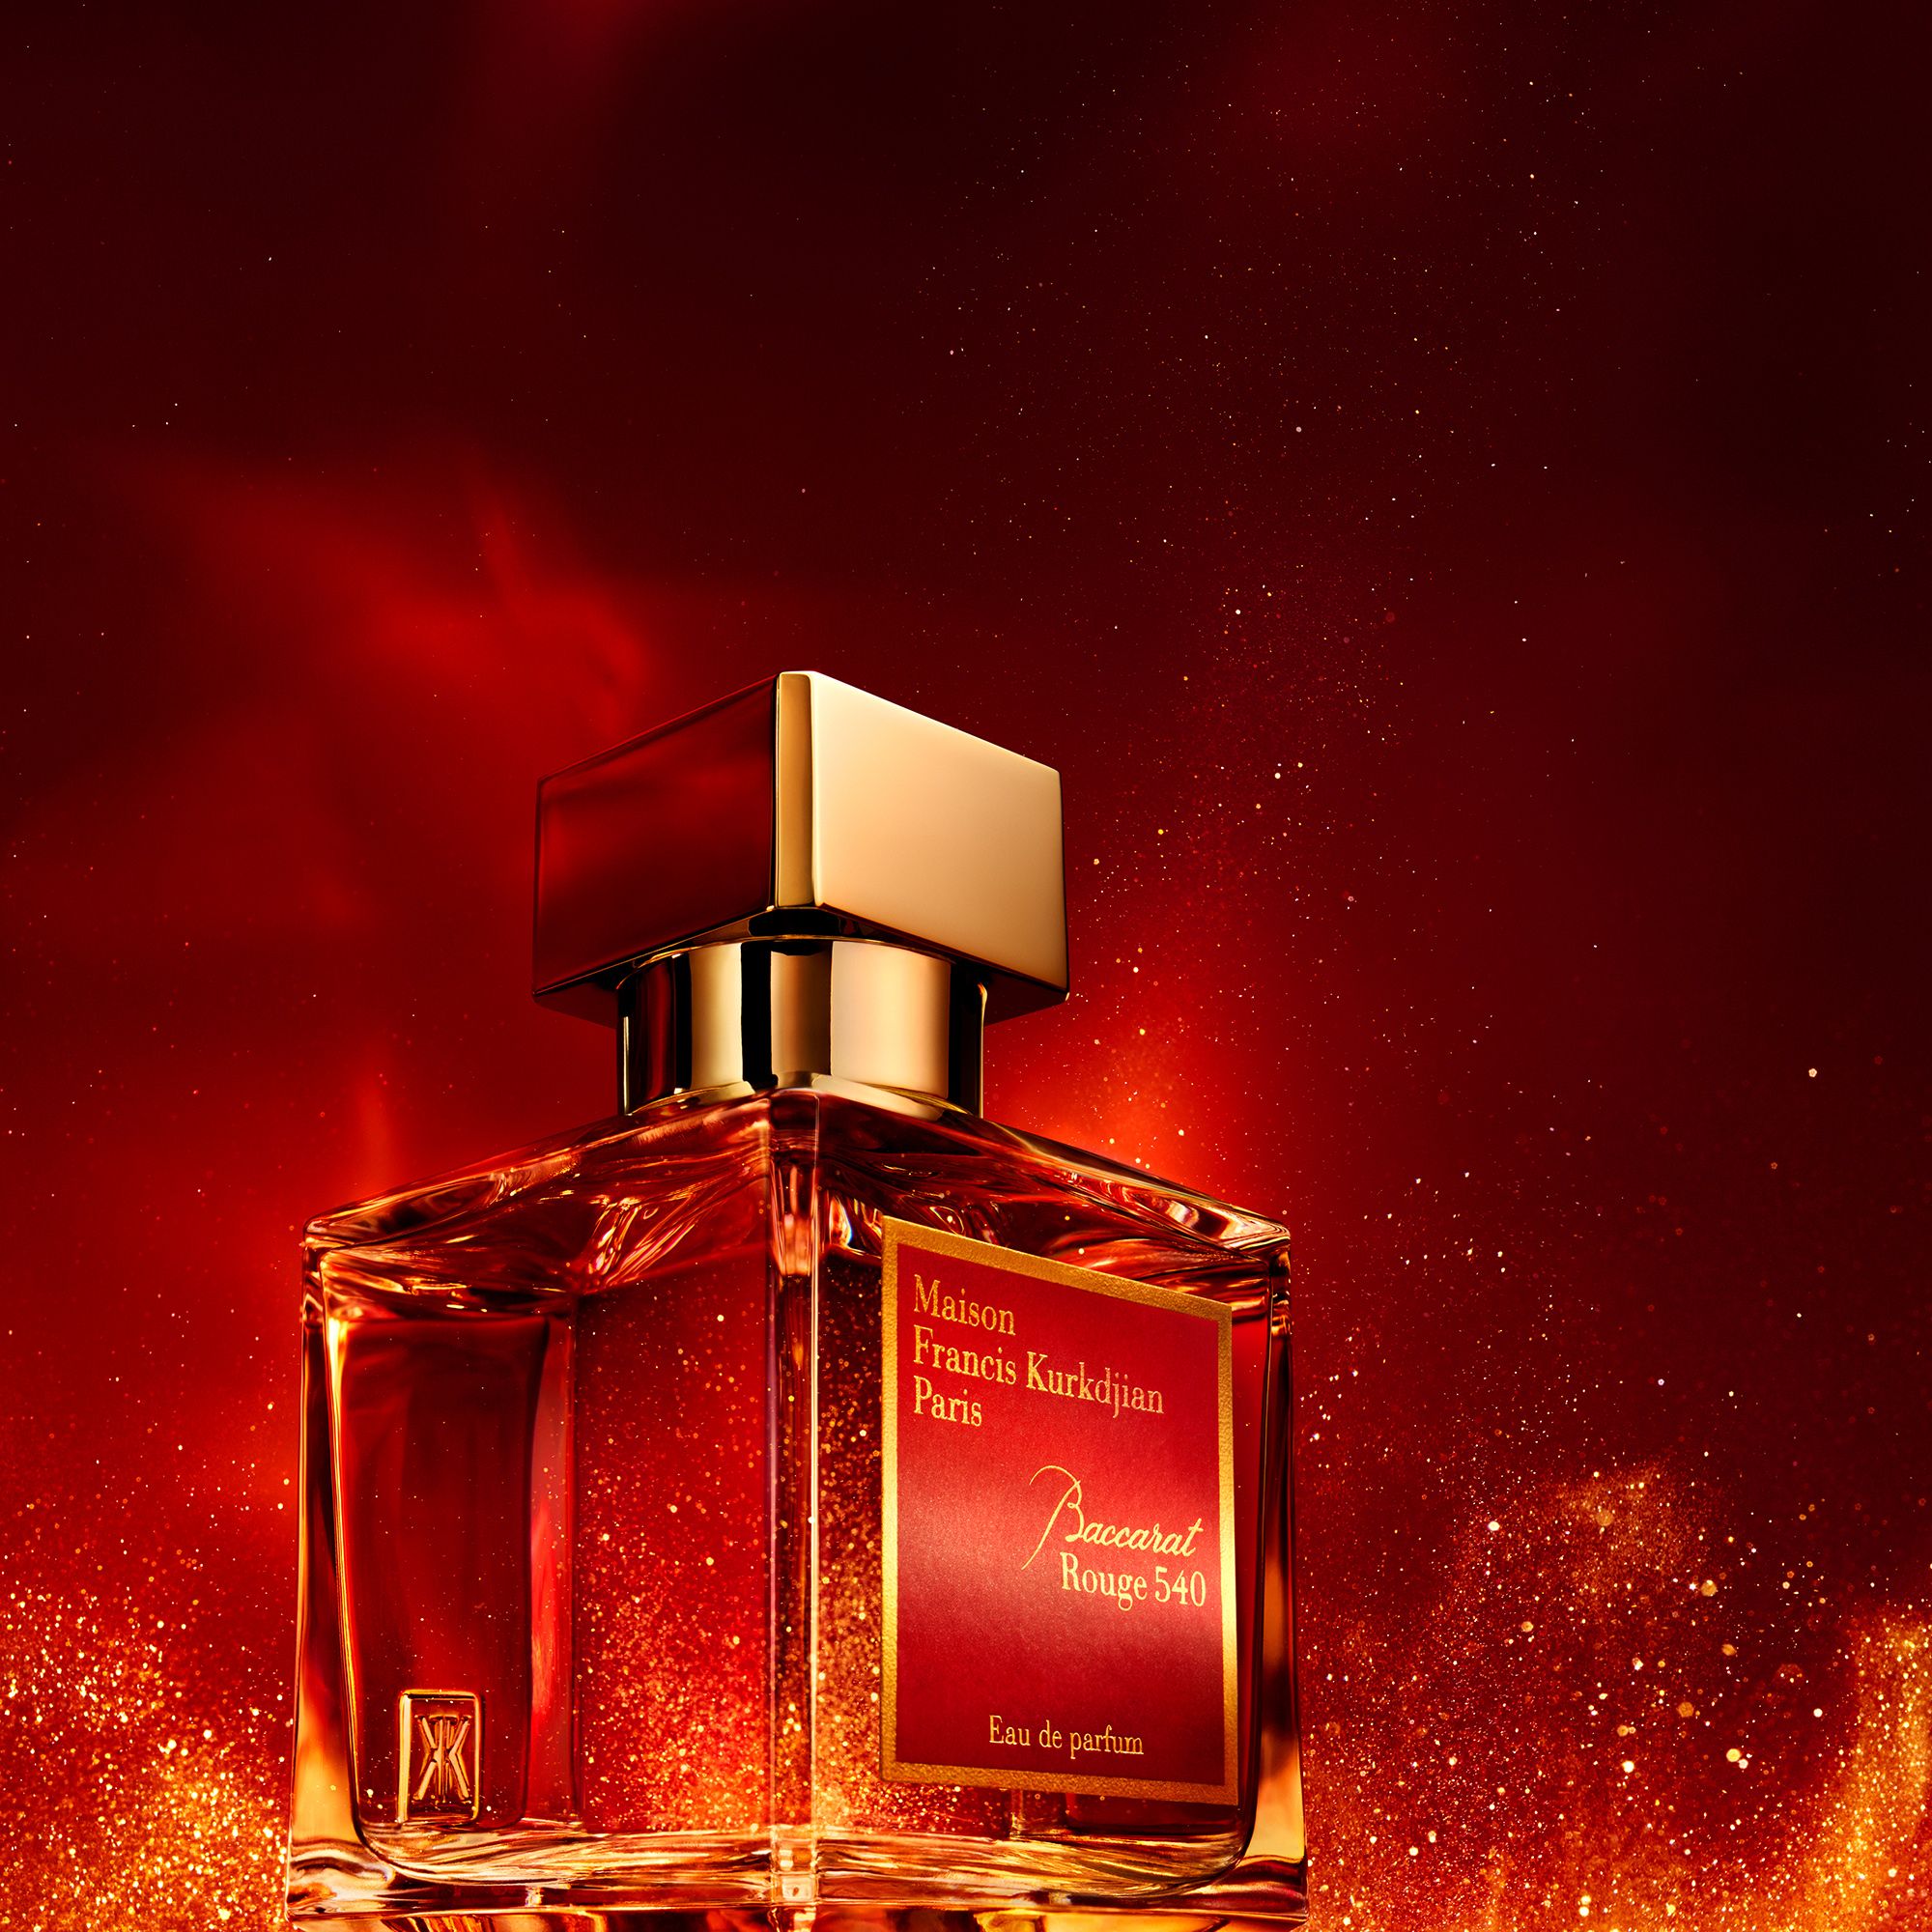 How Baccarat Rouge 540 by Maison Francis Kurkdjian Captured Tradition While  Creating a New Avant-garde in Fragrance